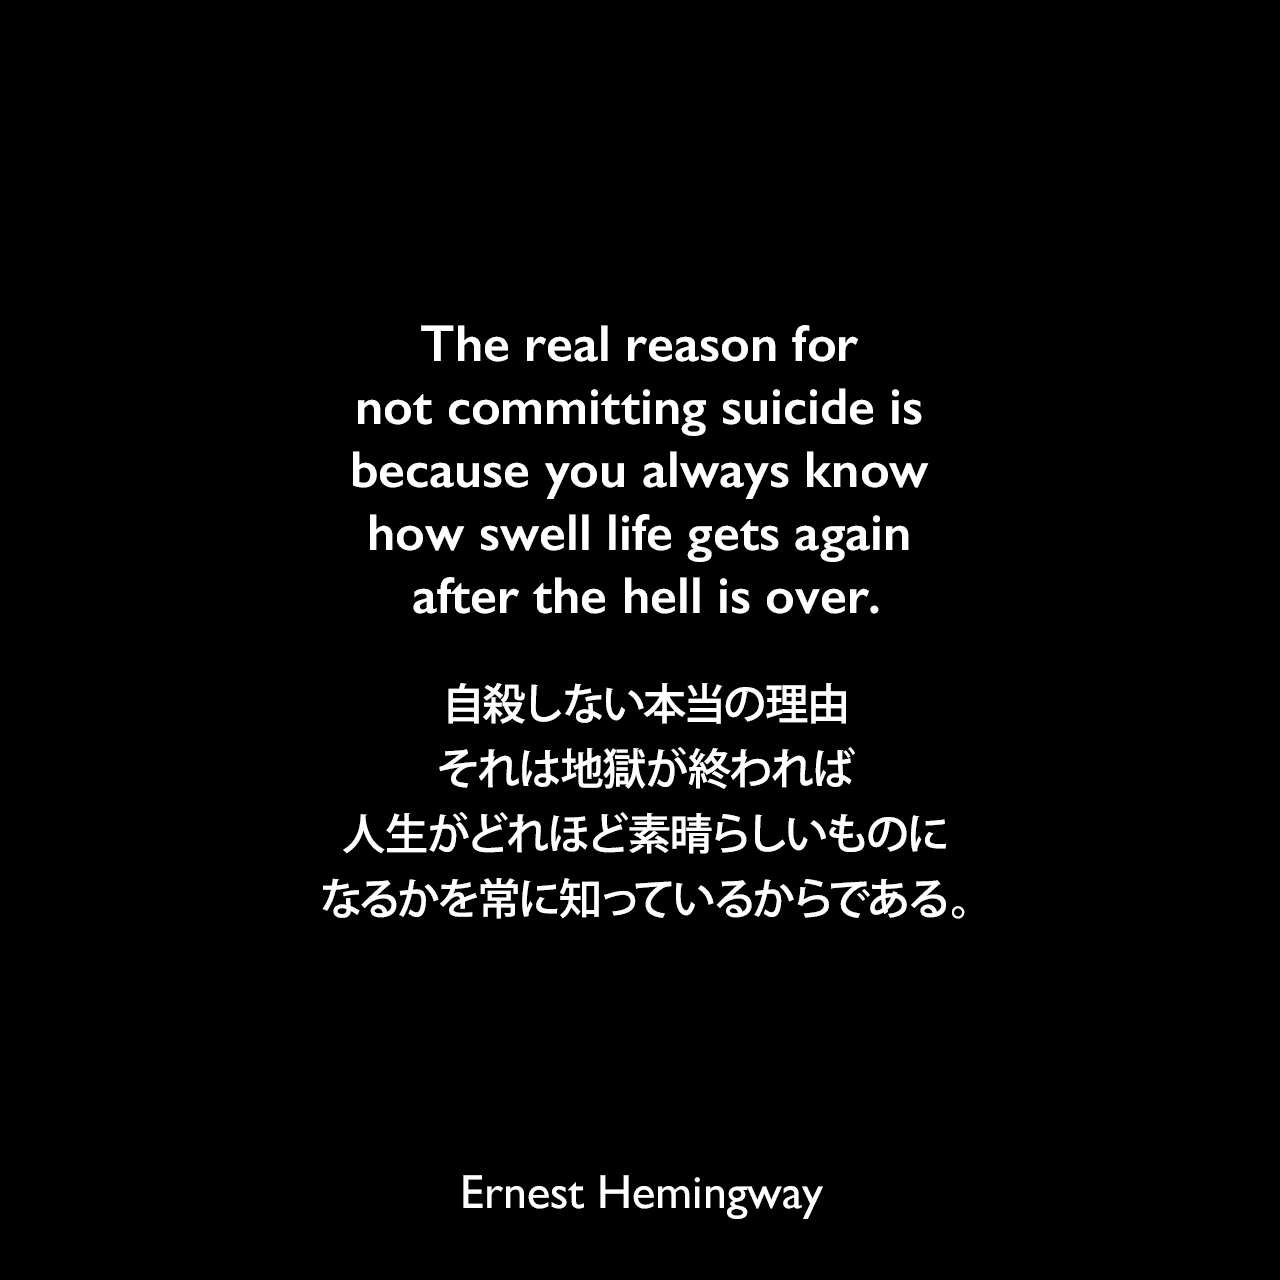 The real reason for not committing suicide is because you always know how swell life gets again after the hell is over.自殺しない本当の理由、それは地獄が終われば、人生がどれほど素晴らしいものになるかを常に知っているからである。Ernest Hemingway